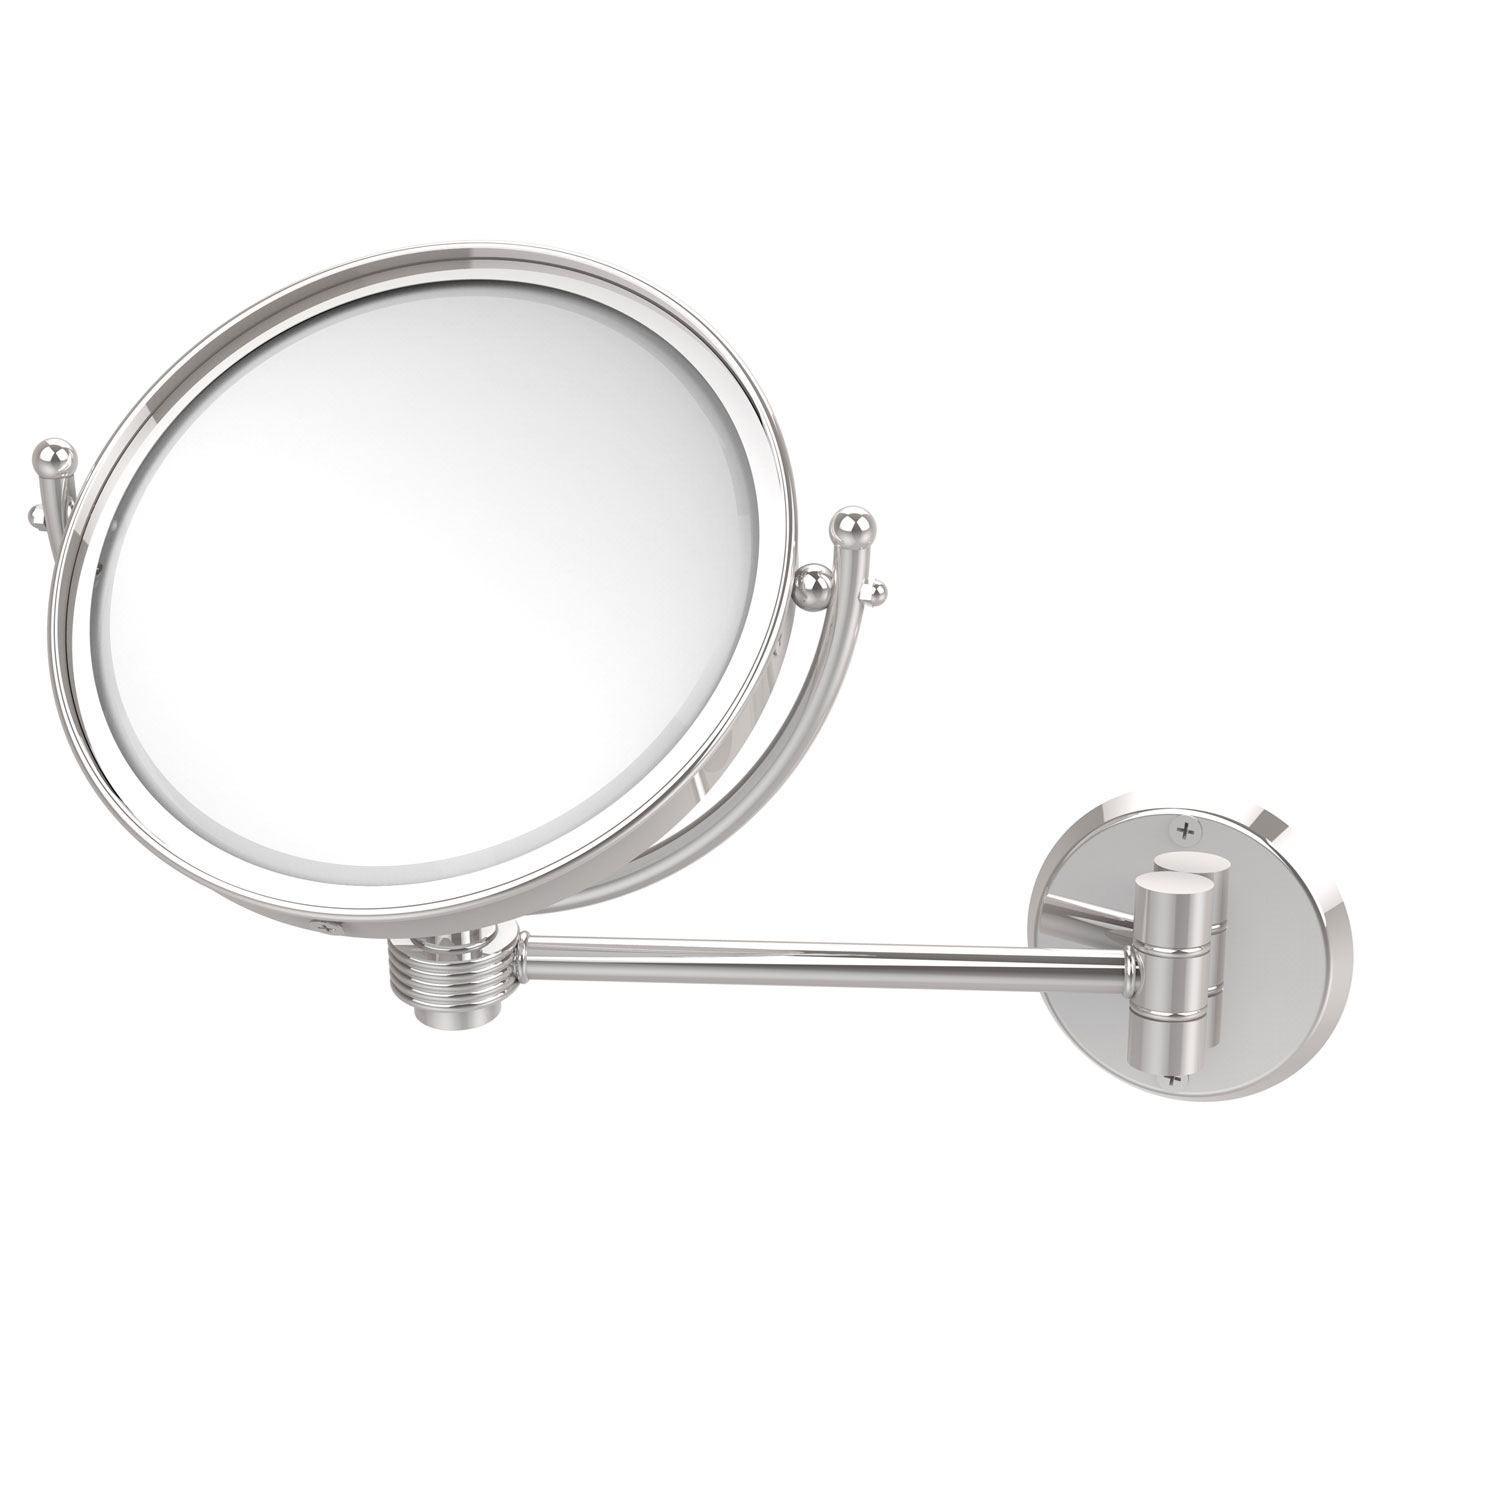 8 Inch Wall Mounted Make-Up Mirror 4X Magnification, Polished Chrome